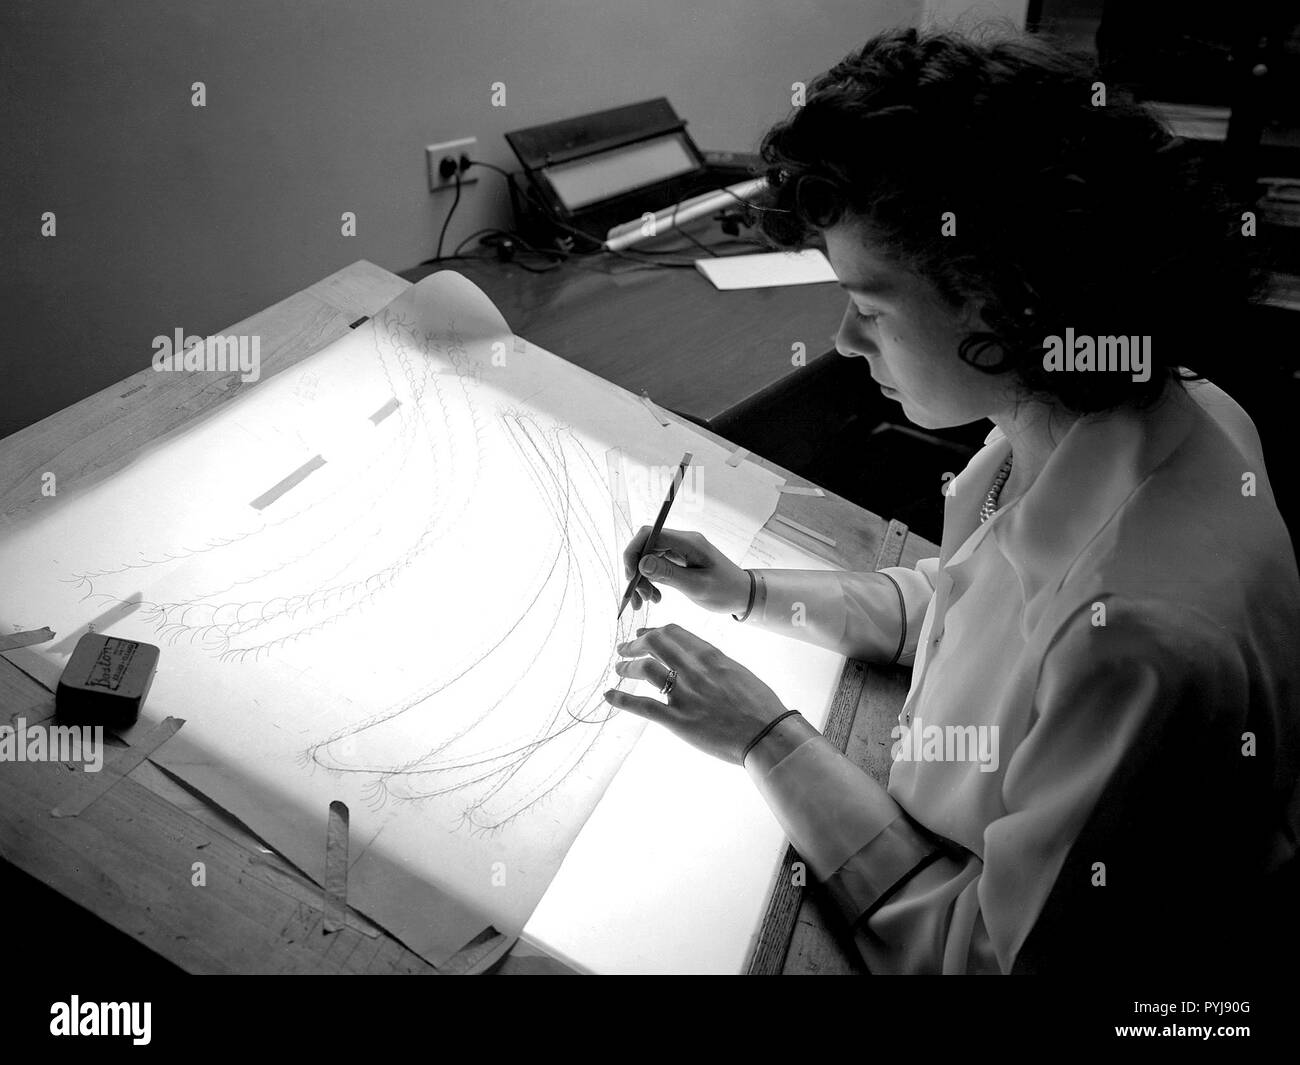 The Computing Section was introduced during World War II to relieve short-handed research engineers of some of the tedious data-taking work. The computers made the initial computations and plotted the data graphically. The researcher then analyzed the data and either summarized the findings in a report or made modifications or ran the test again. Stock Photo